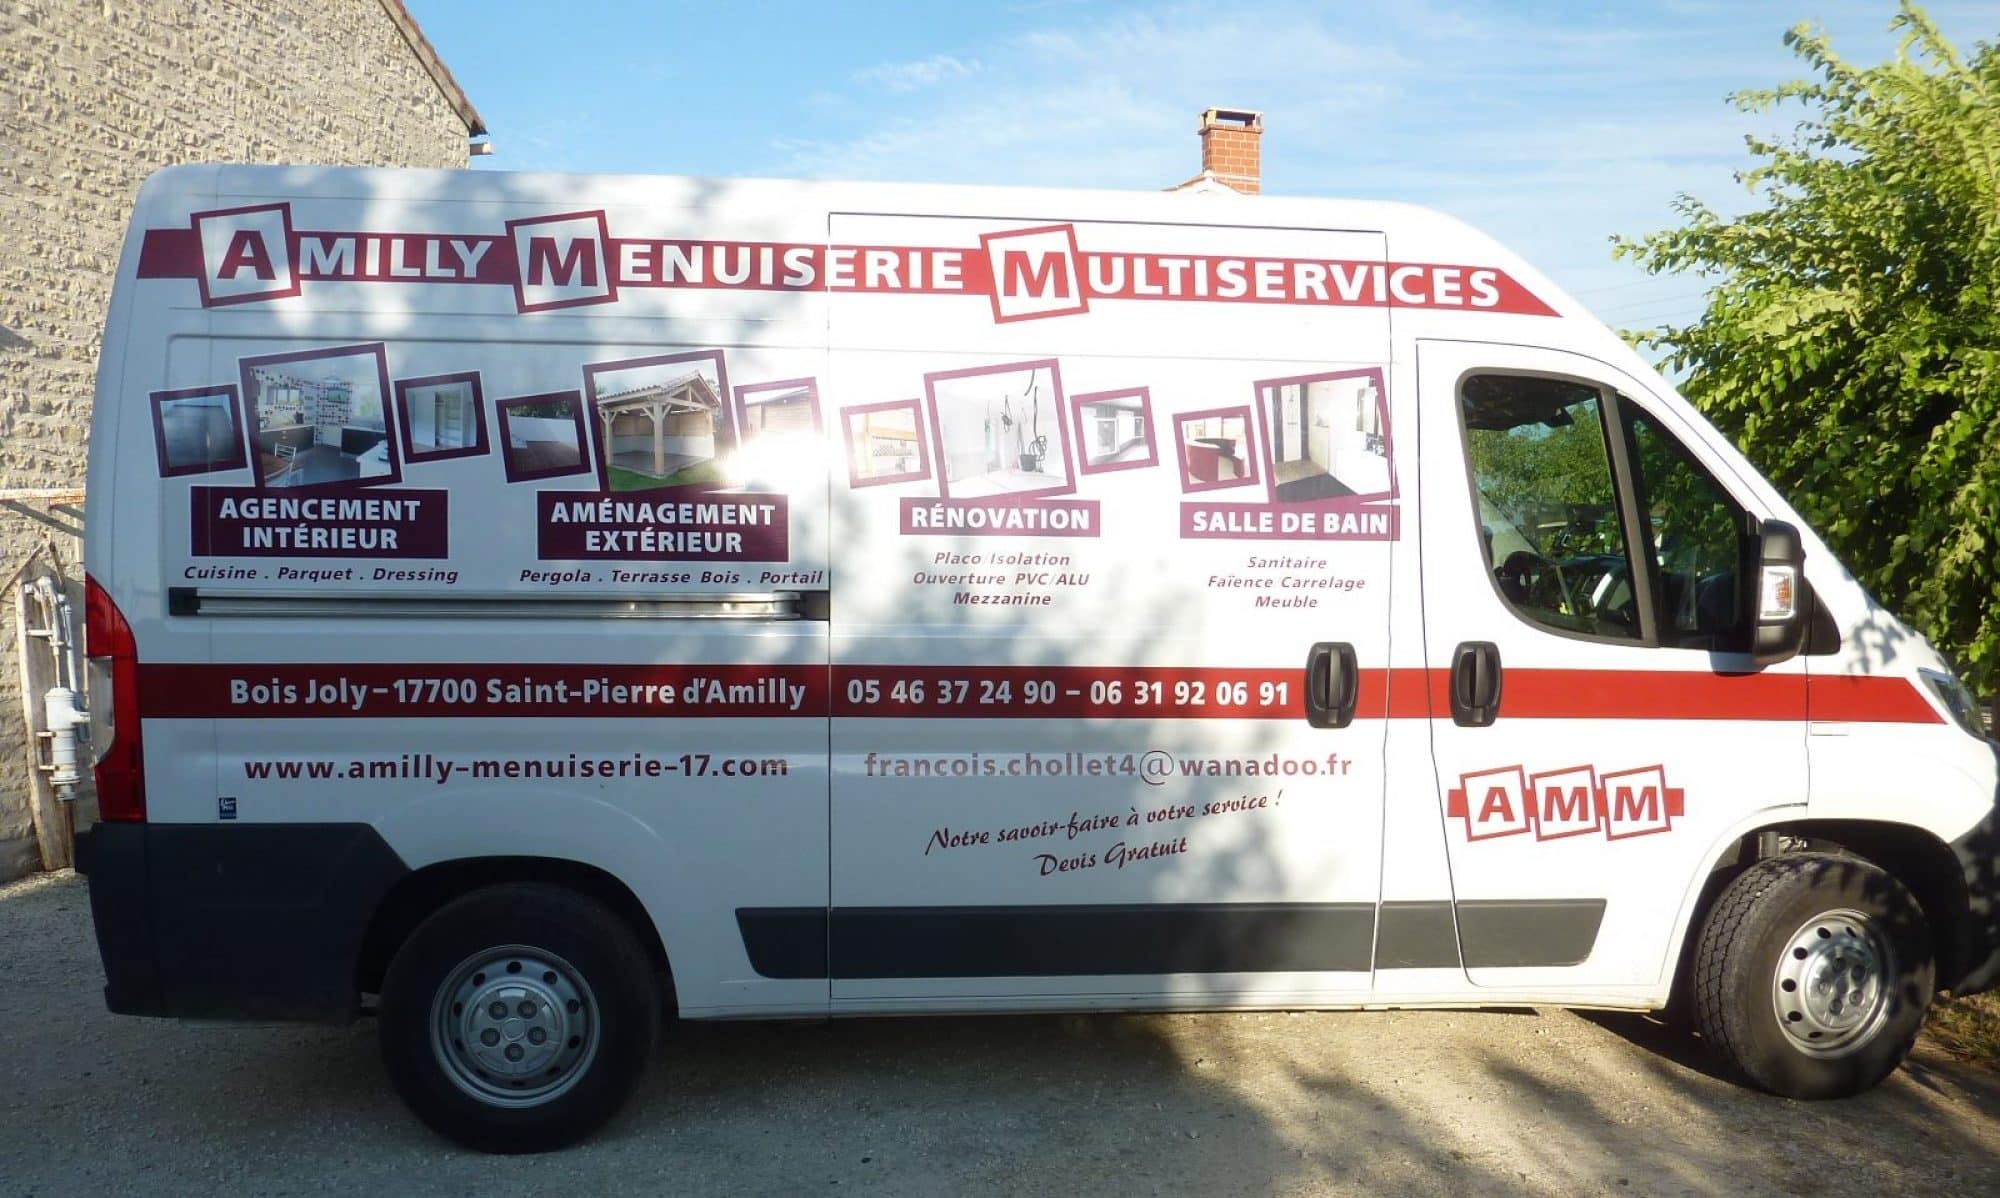 Amilly Menuiserie Multiservices